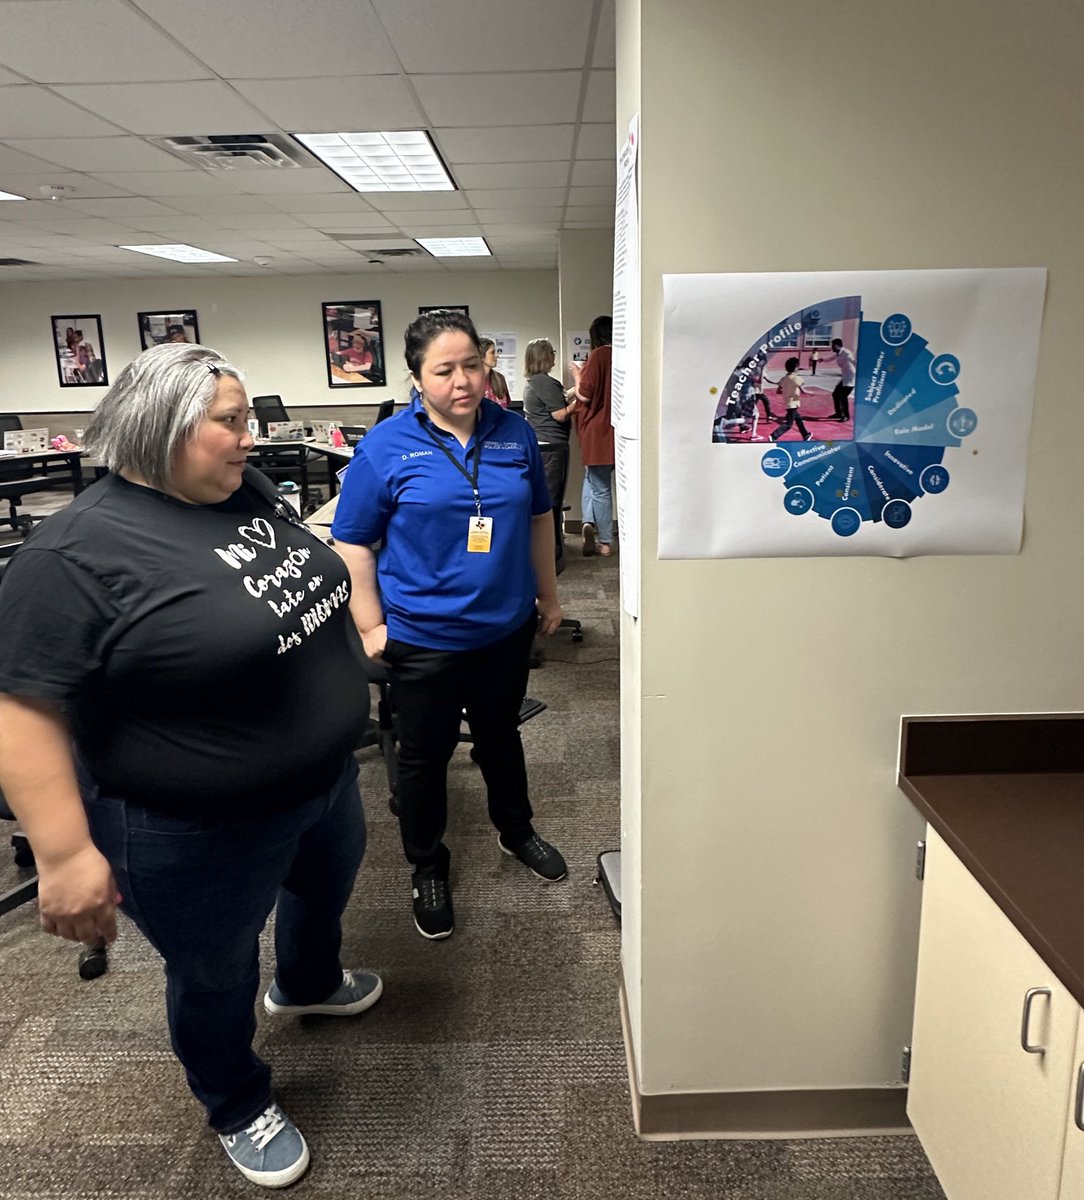 We are proud of our CTE Director for facilitating round 2 of our branding collaboration. From videos to gallery walk analysis and individual input, we are moving in the right direction. #CISDBelieves #LeadershipDevelopment #CAOChronicles